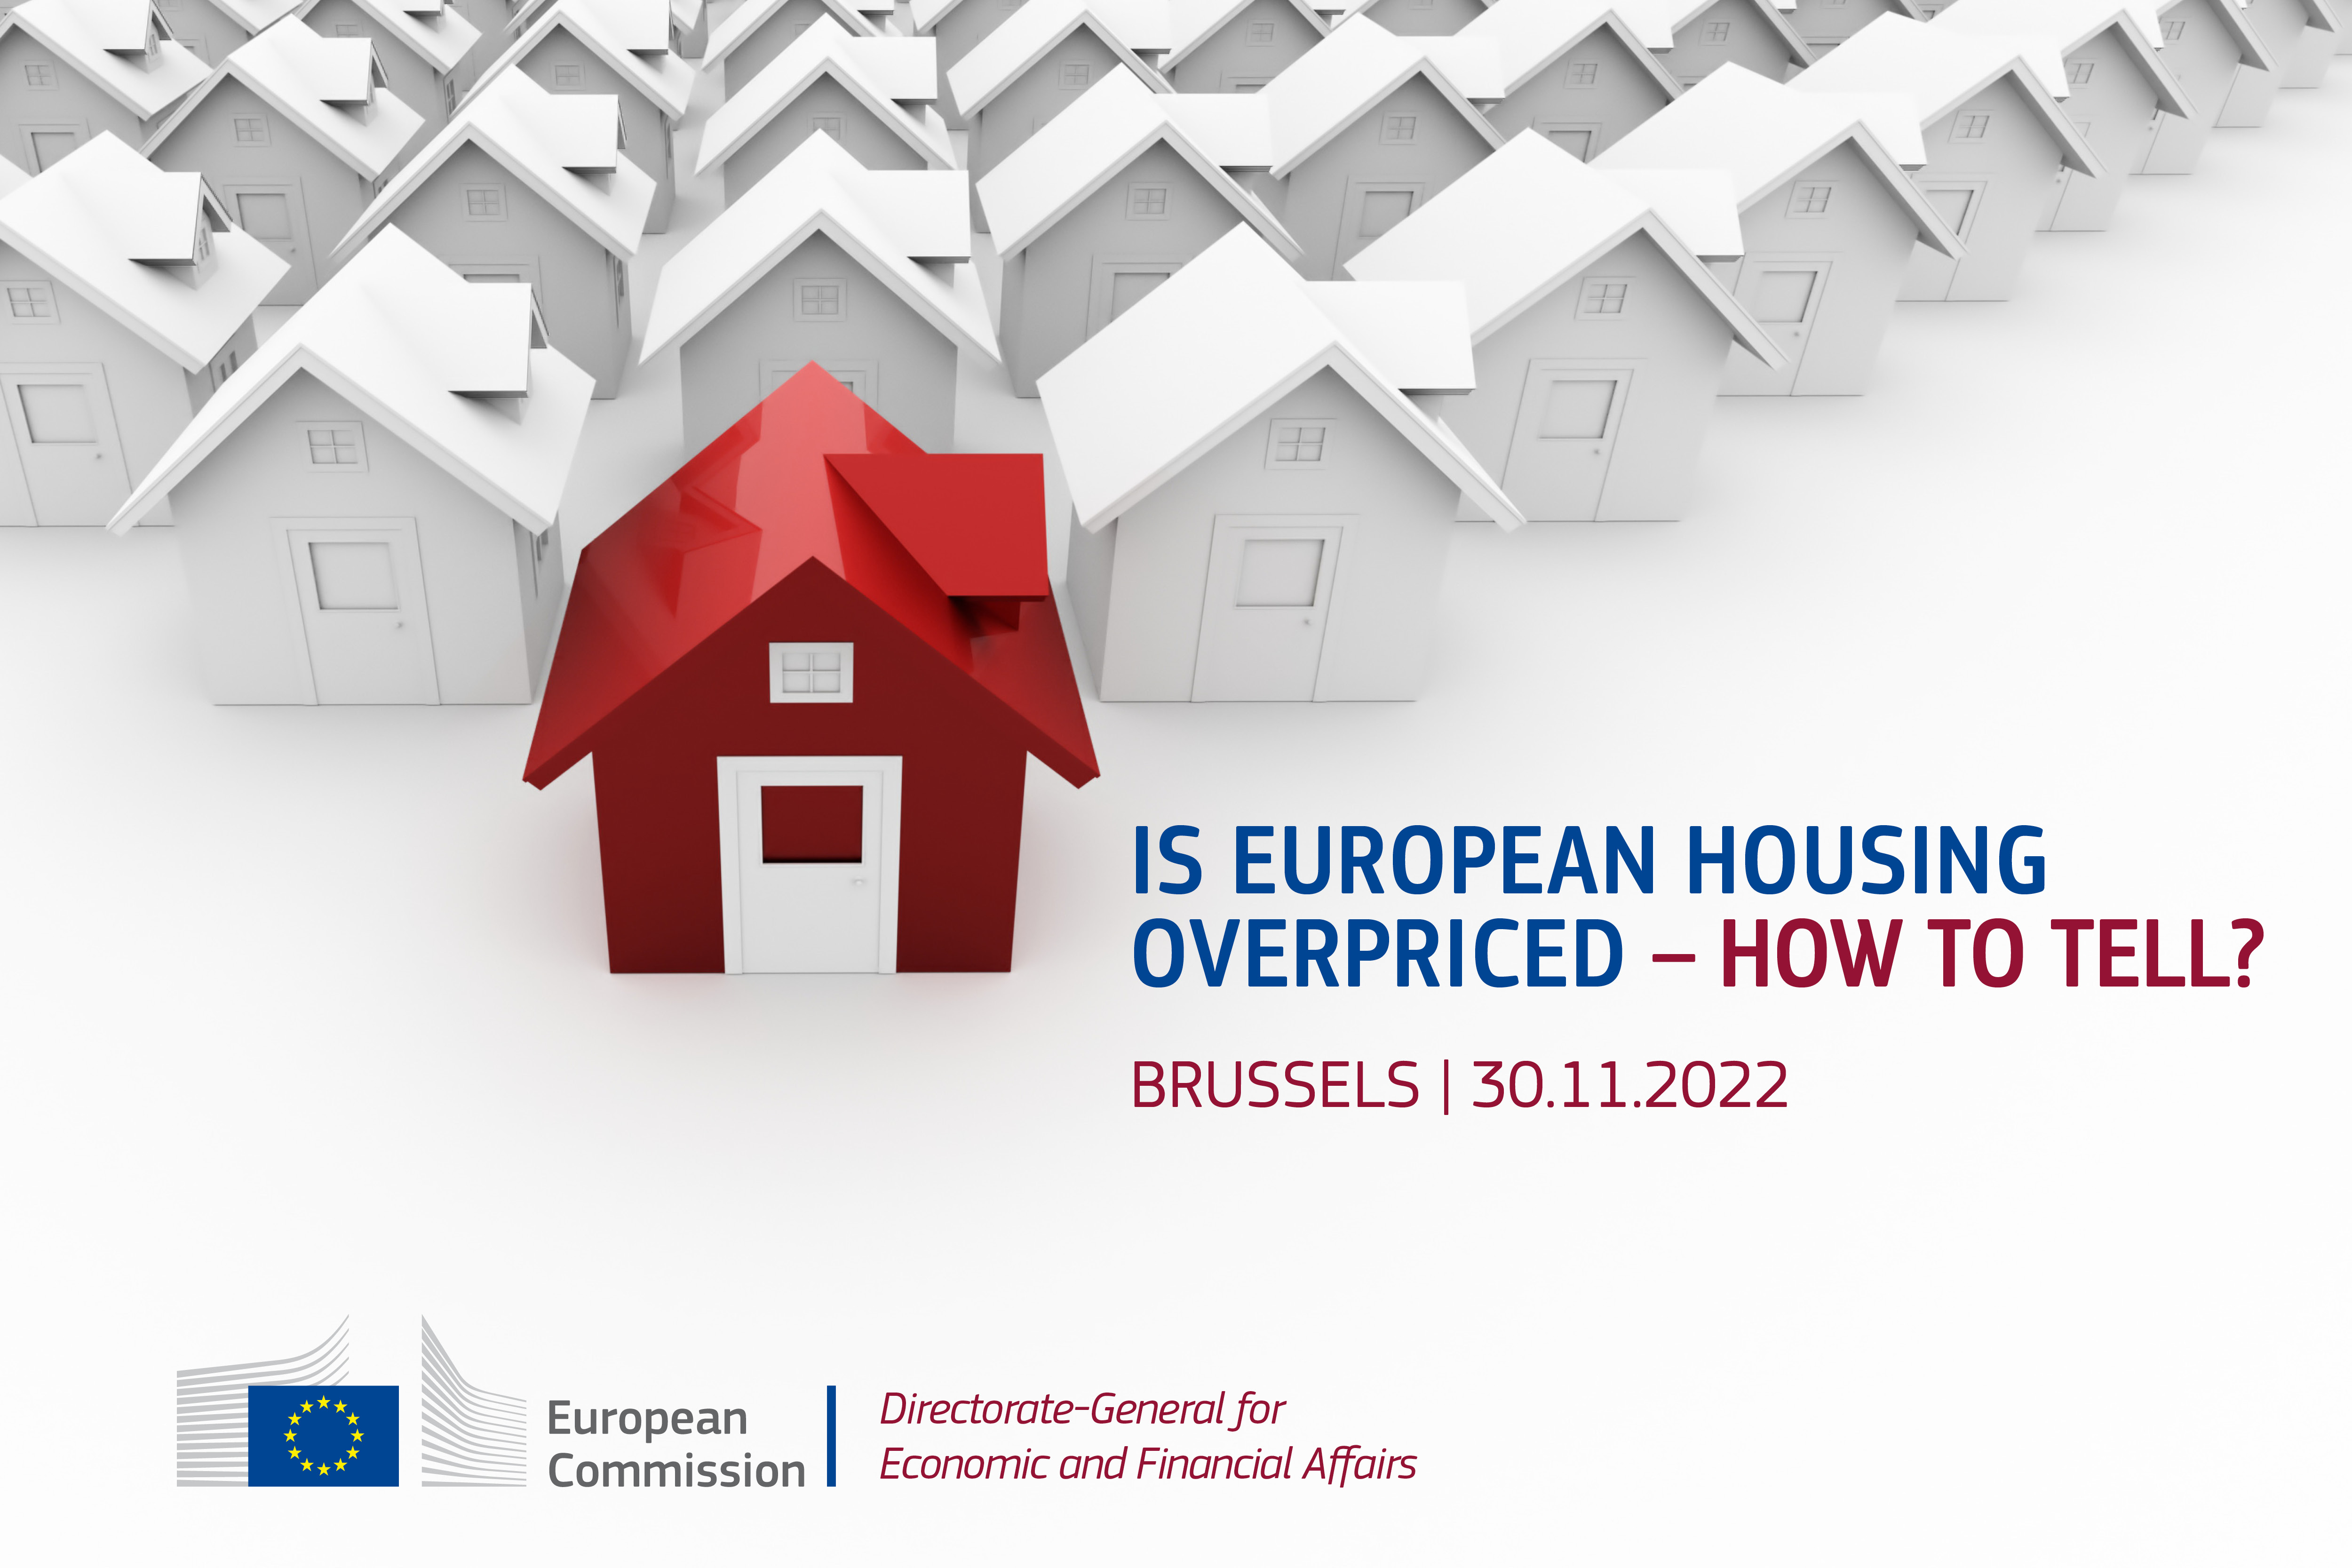 Is European housing overpriced – how to tell?